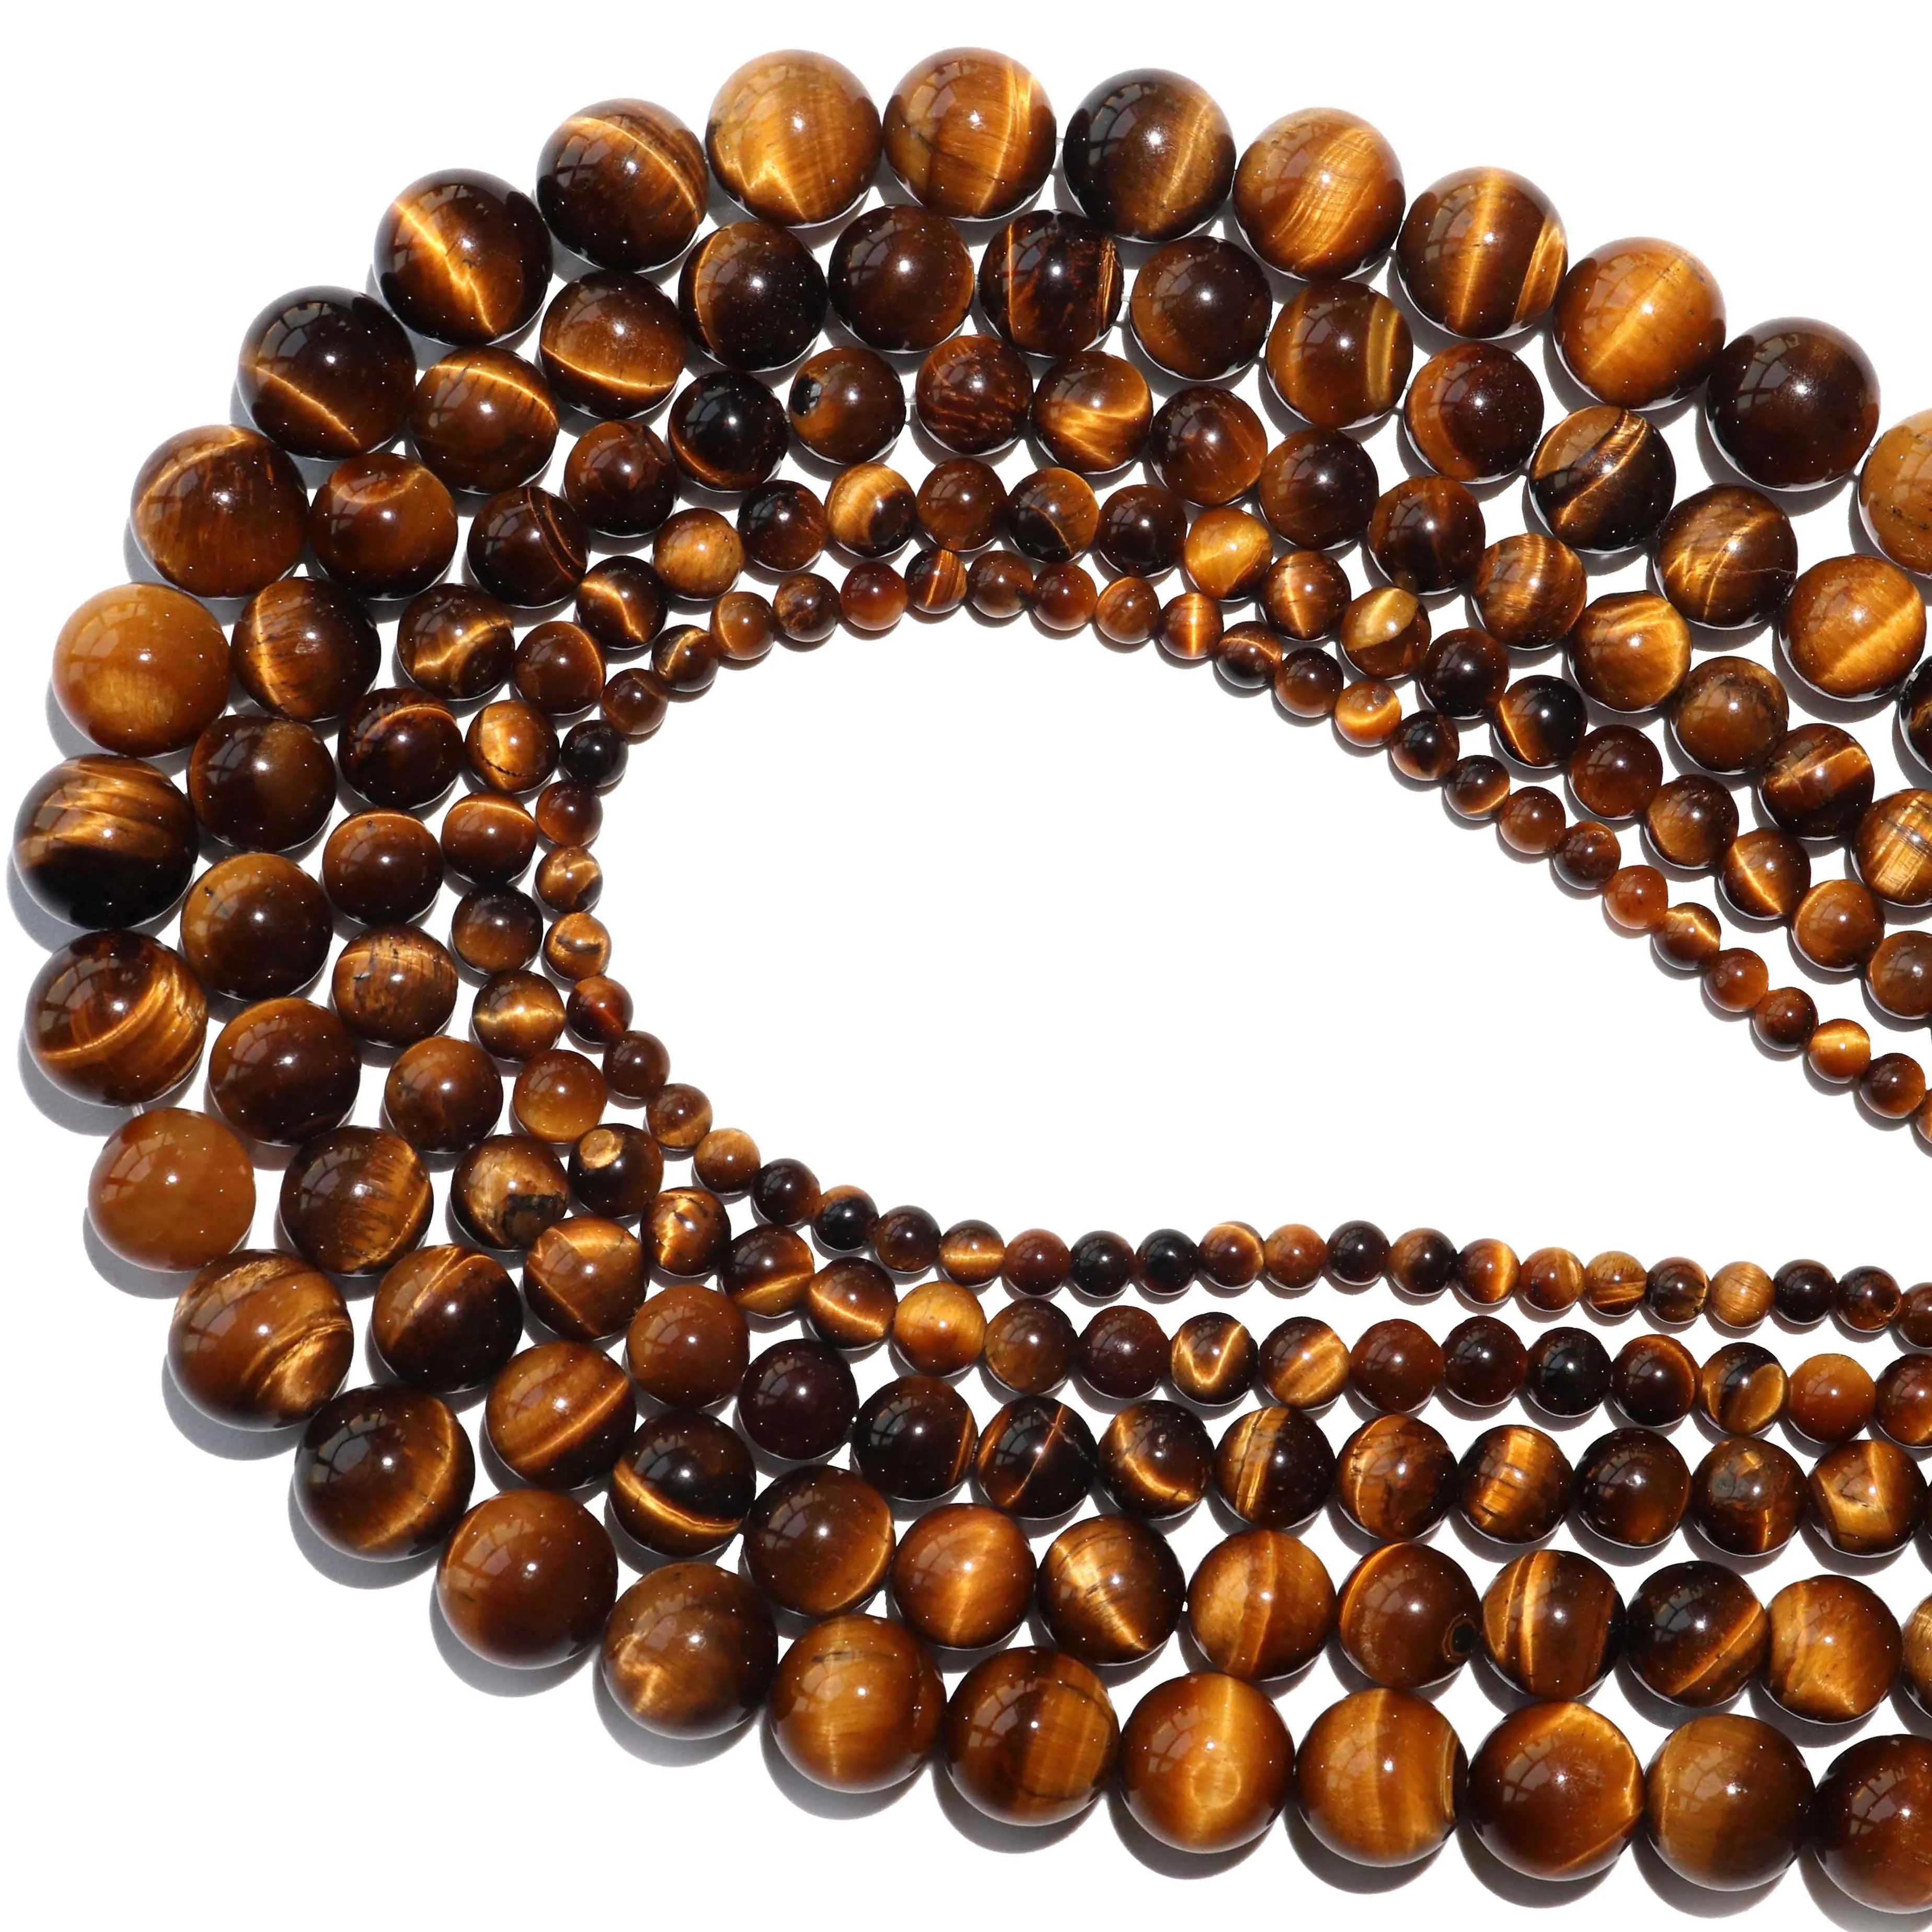 Natural Yellow Tiger Eye Stone Loose Bead For Jewelry Making DIY Bracelet Necklace Accessories Material 2 3 4 6 8 10 12mm